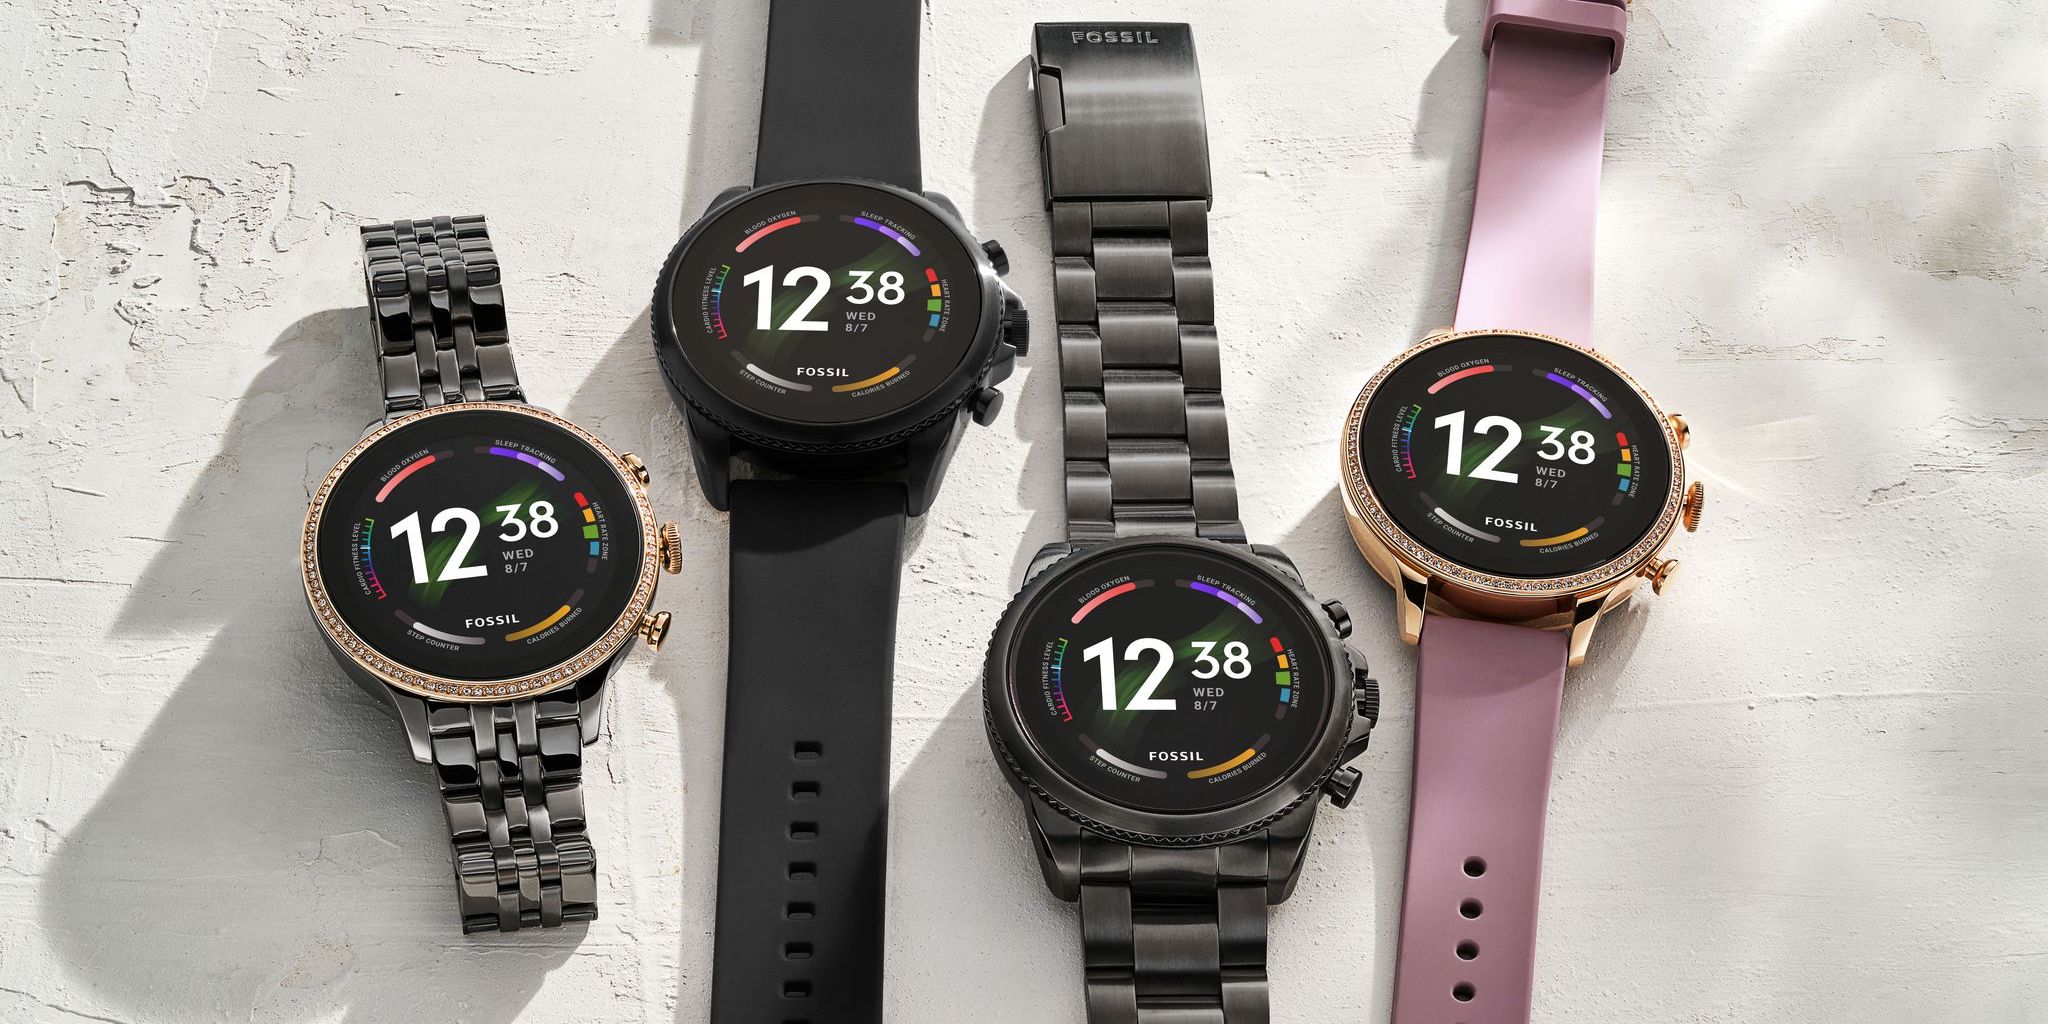 Fossil unveils Gen OS 4100+, and - 3 2022 9to5Google in SpO2, 6: Wear